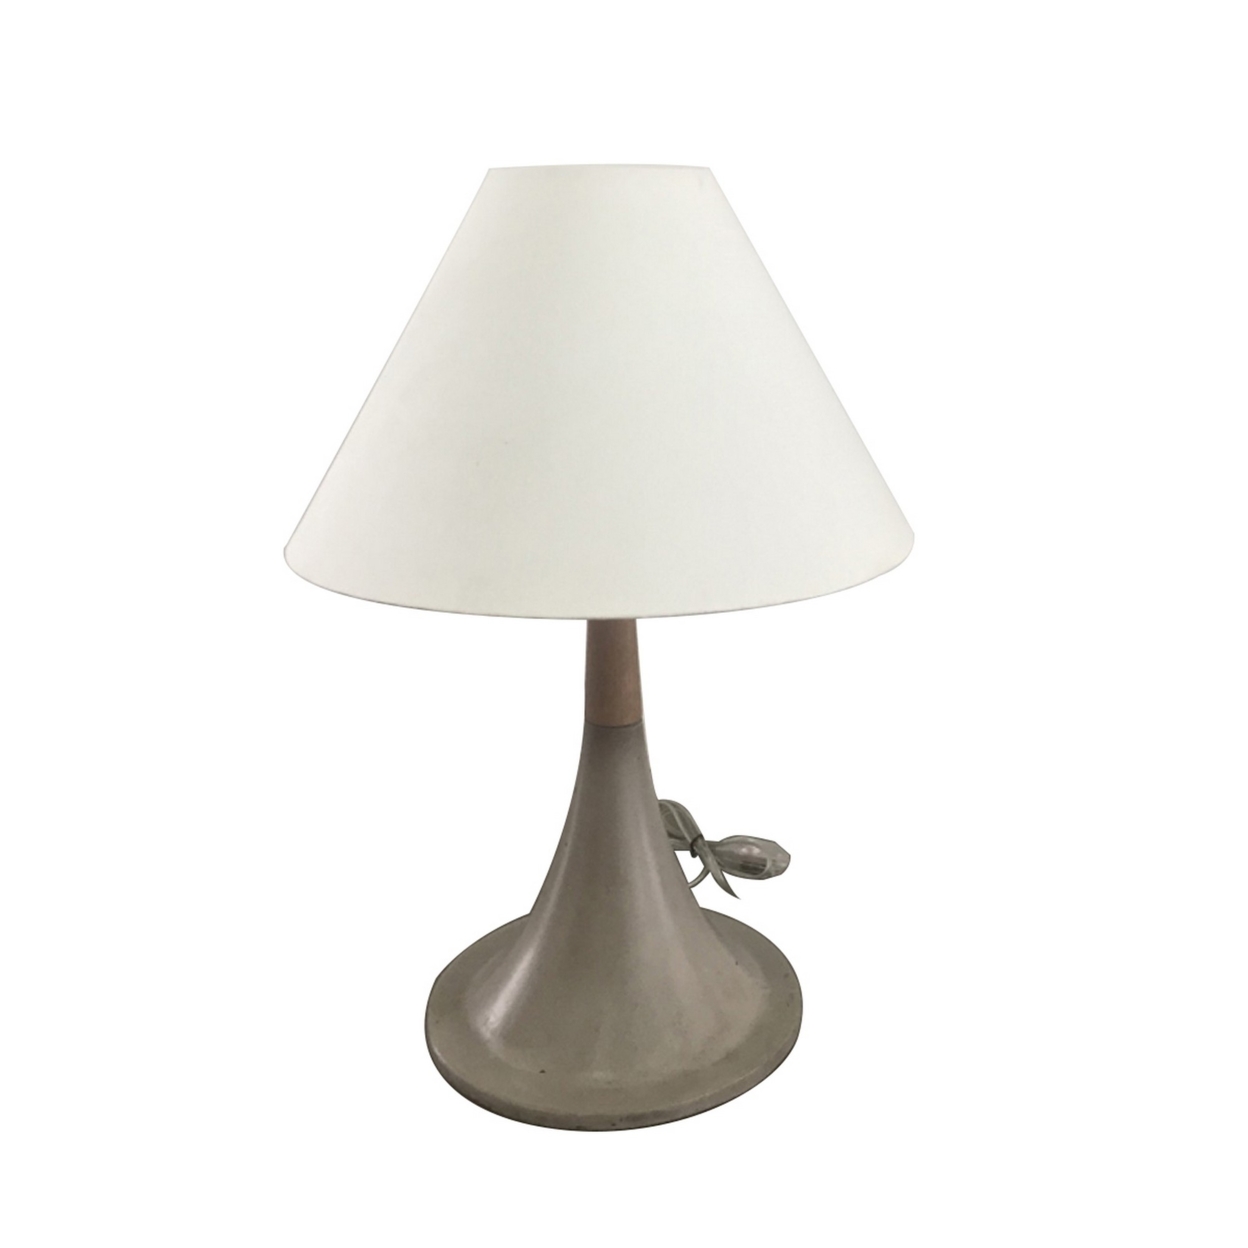 Contemporary Style Concrete Base Table Lamp With Shade, White And Gray- Saltoro Sherpi